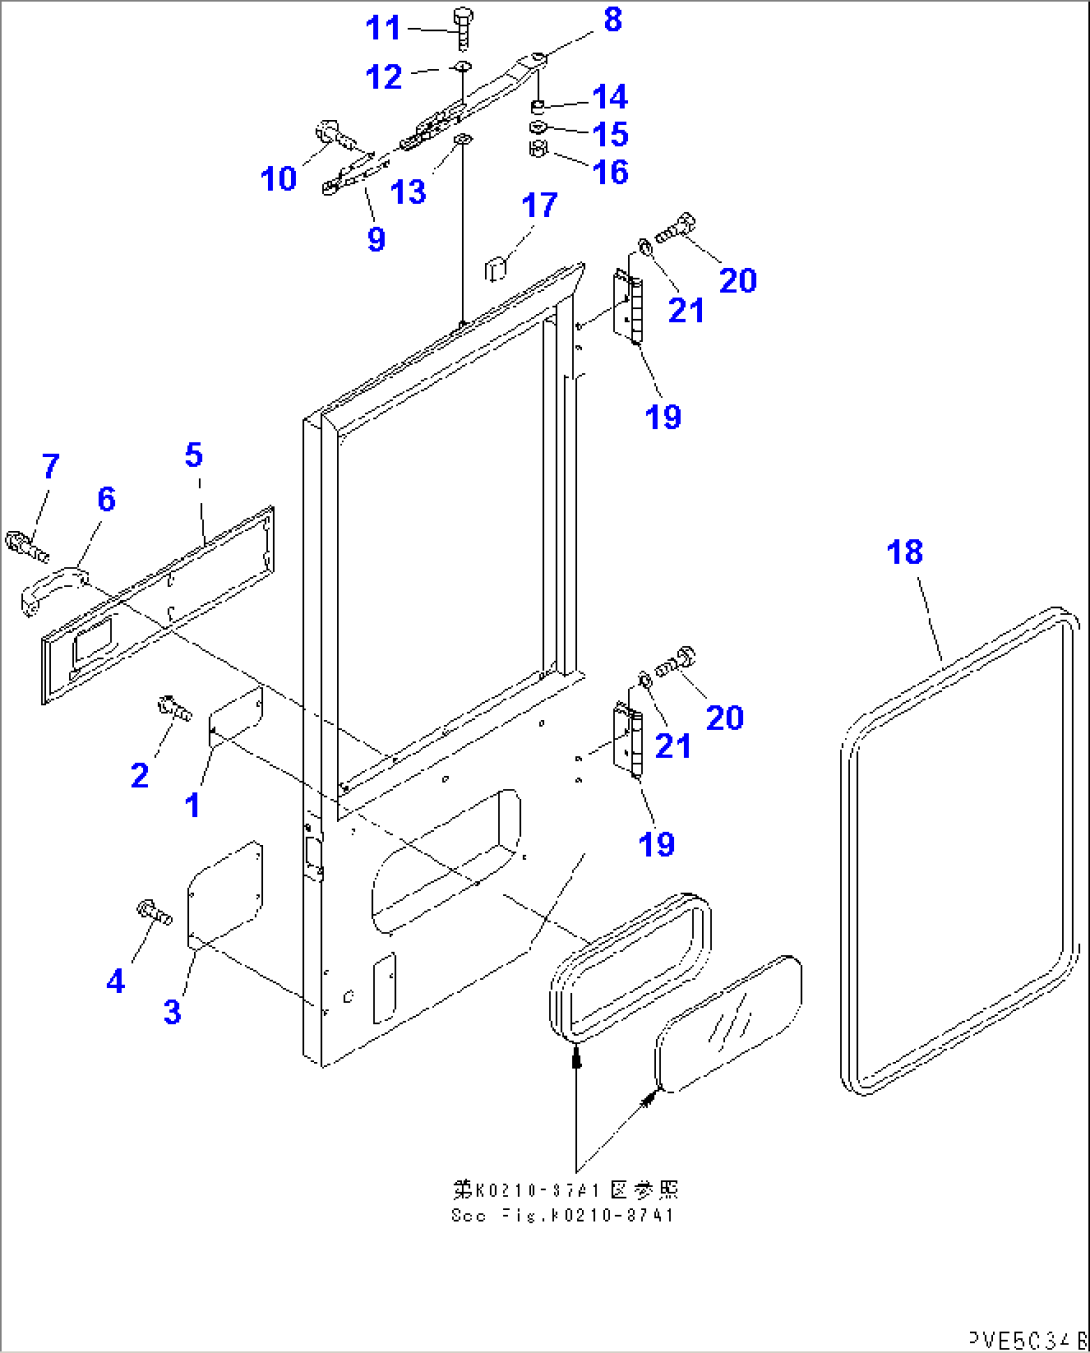 2-PERSONS CAB (DOOR RELATED PARTS L.H.)(#53001-55000)